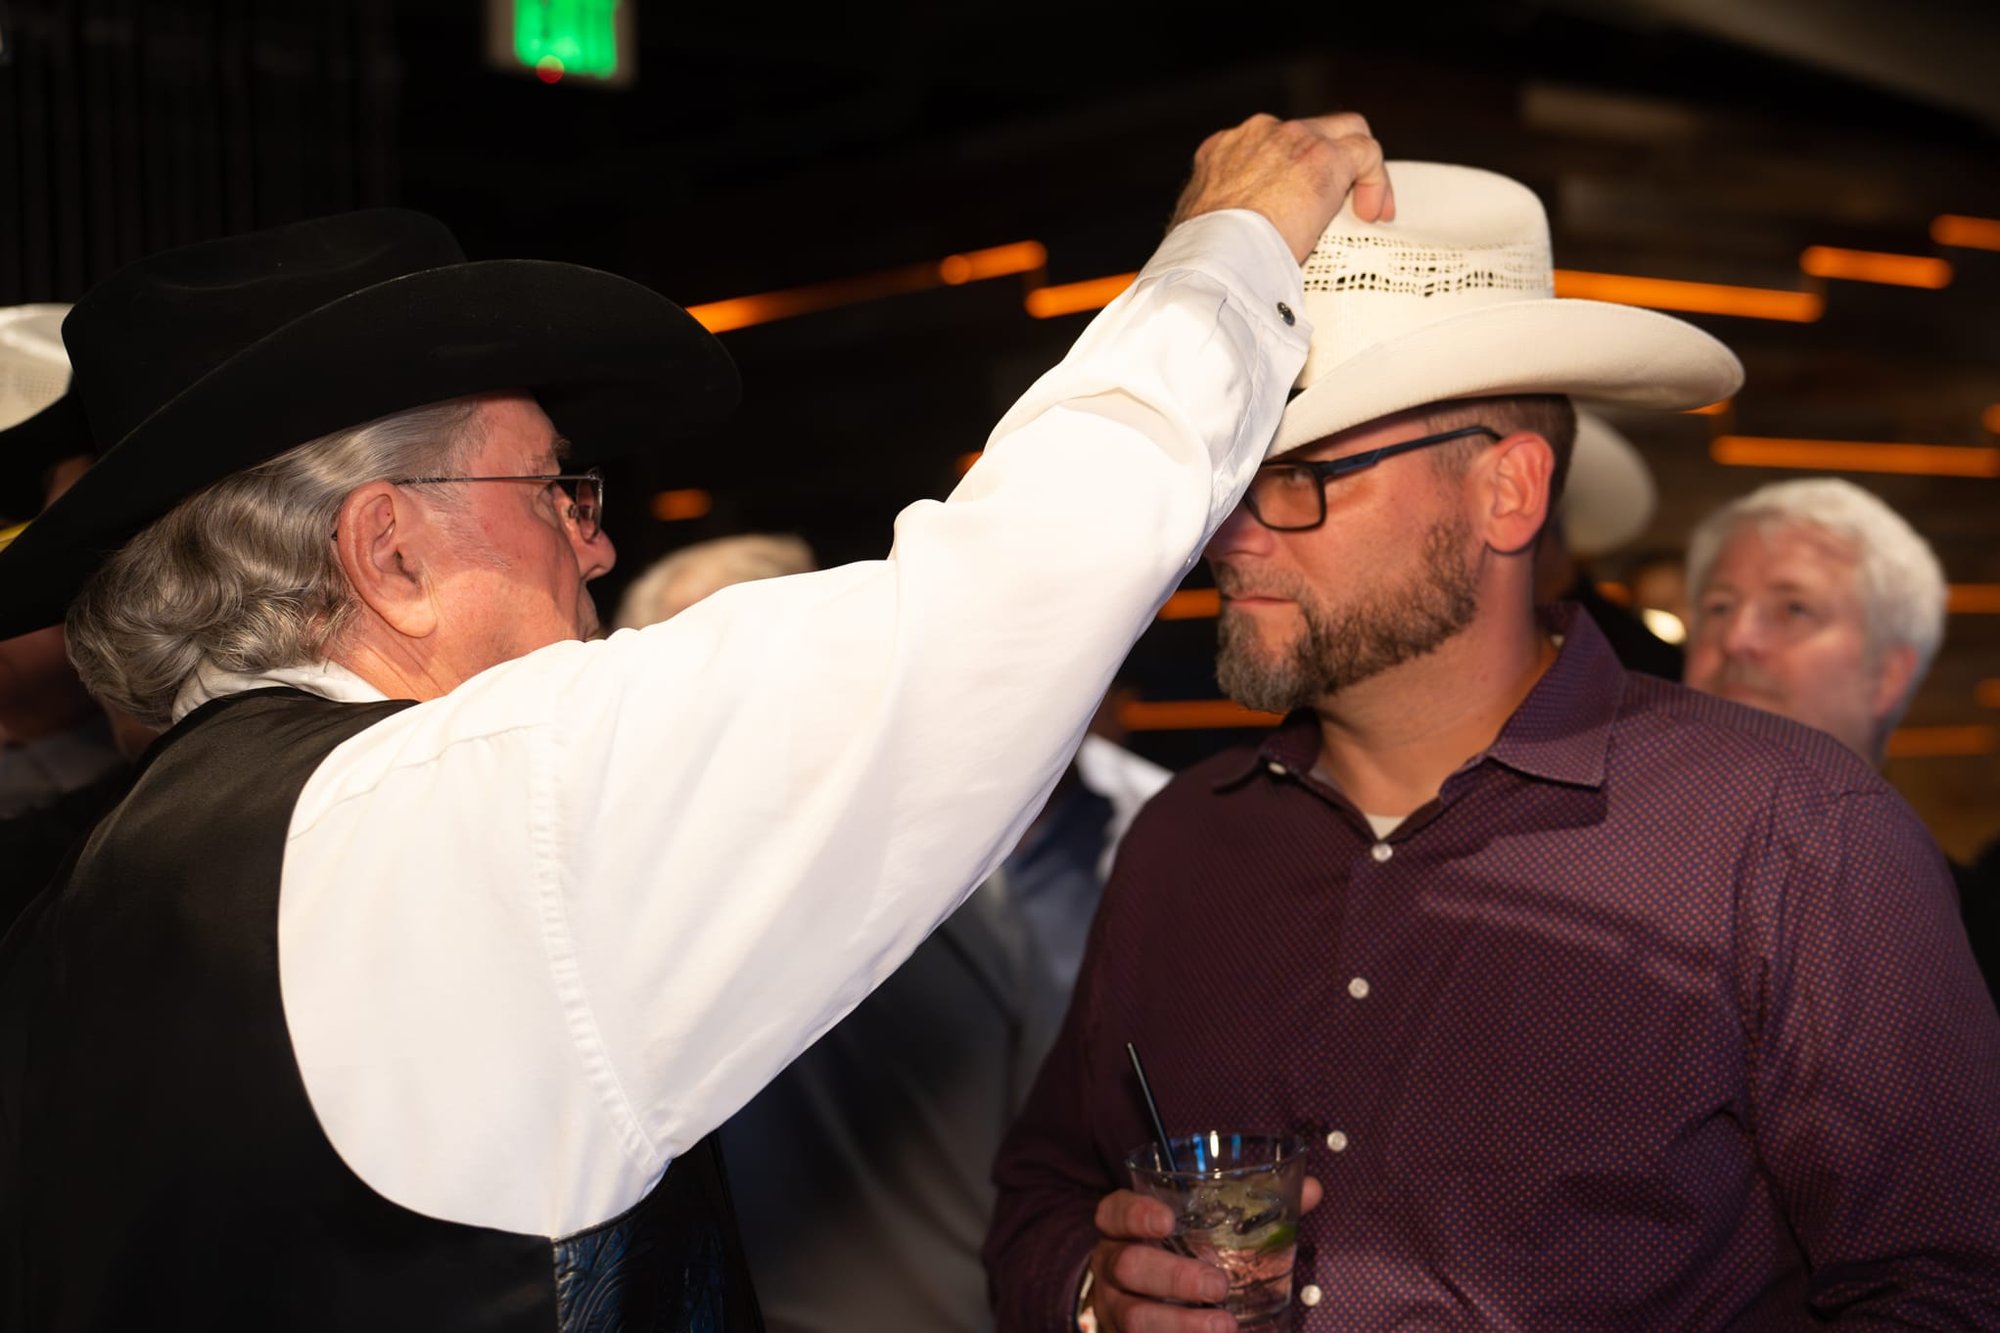 Wild Bill makes custom cowboy hats for Security 101’s Appreciation Event attendees at the Happiest Hour rooftop bar